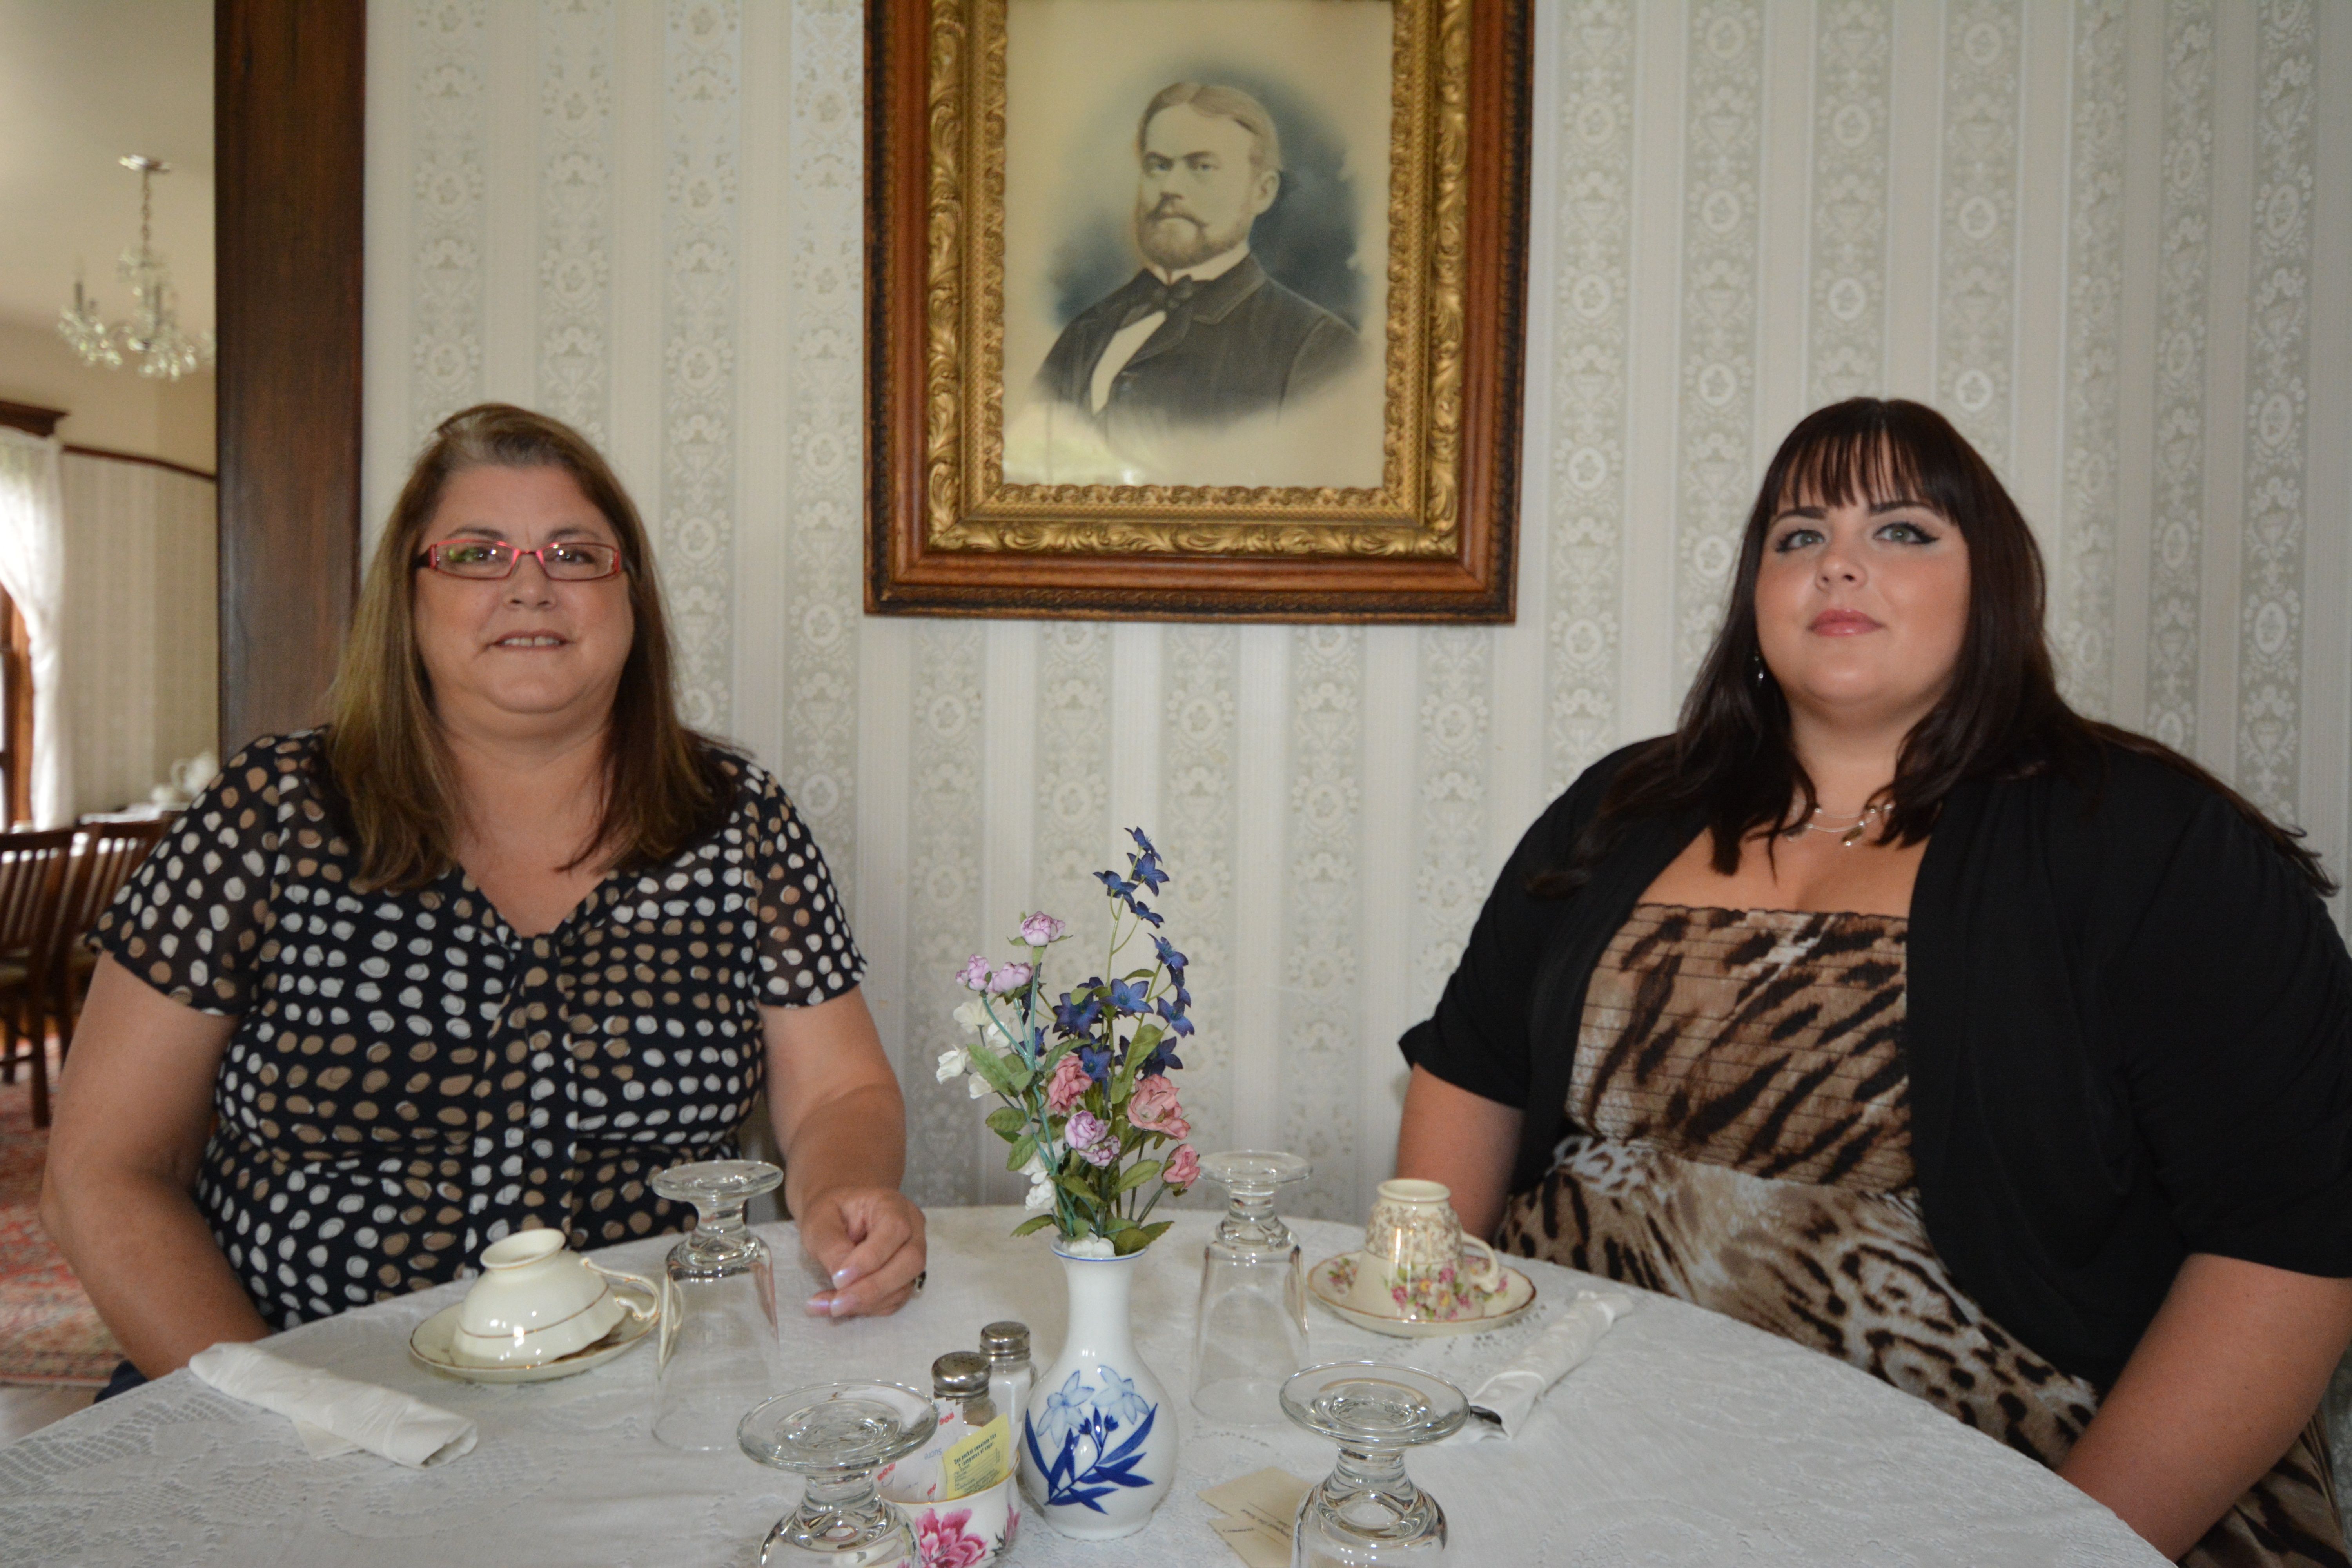 MURDER MADAMS – Delores Coghill and Sarah Fergusson are the organizers of the Murder Mystery held at the Cronquist House on Aug. 9th and 16th.